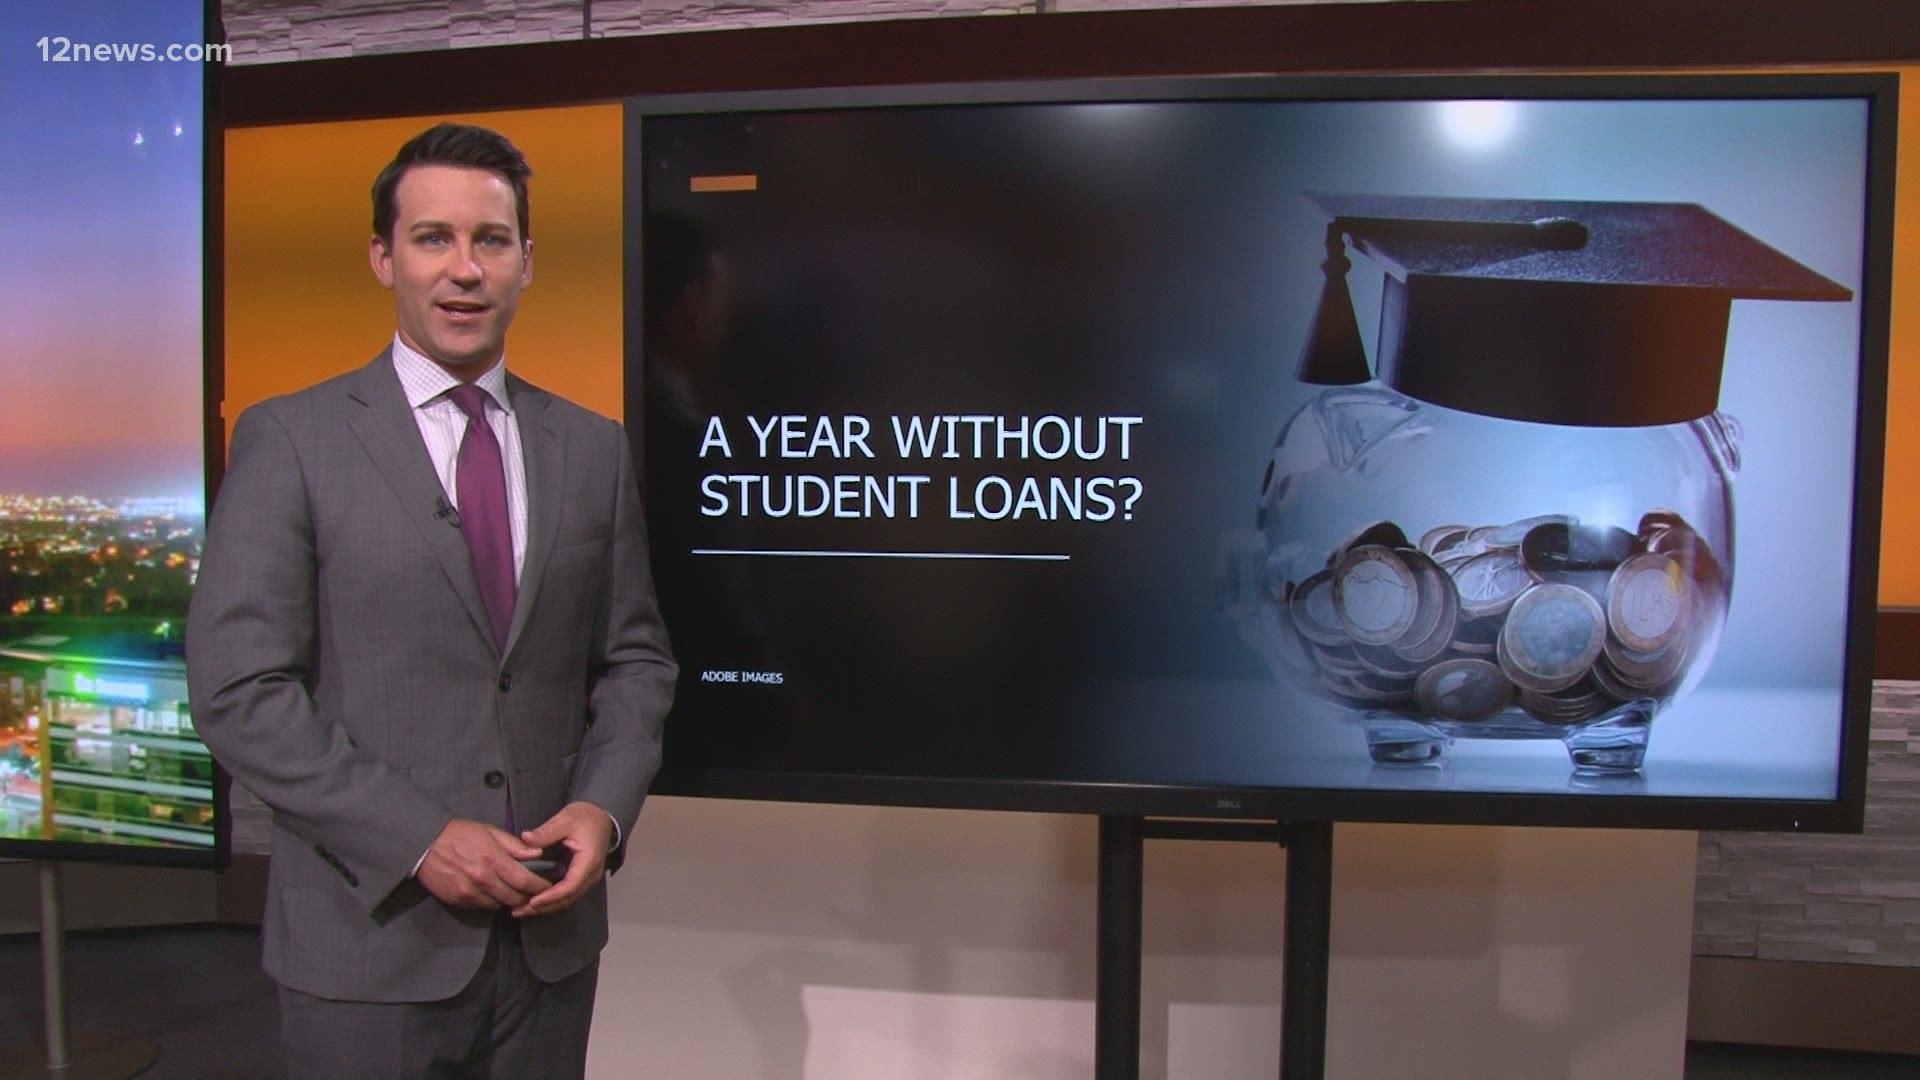 What would you do if you no longer had to pay your student loans? Share your thoughts with us.